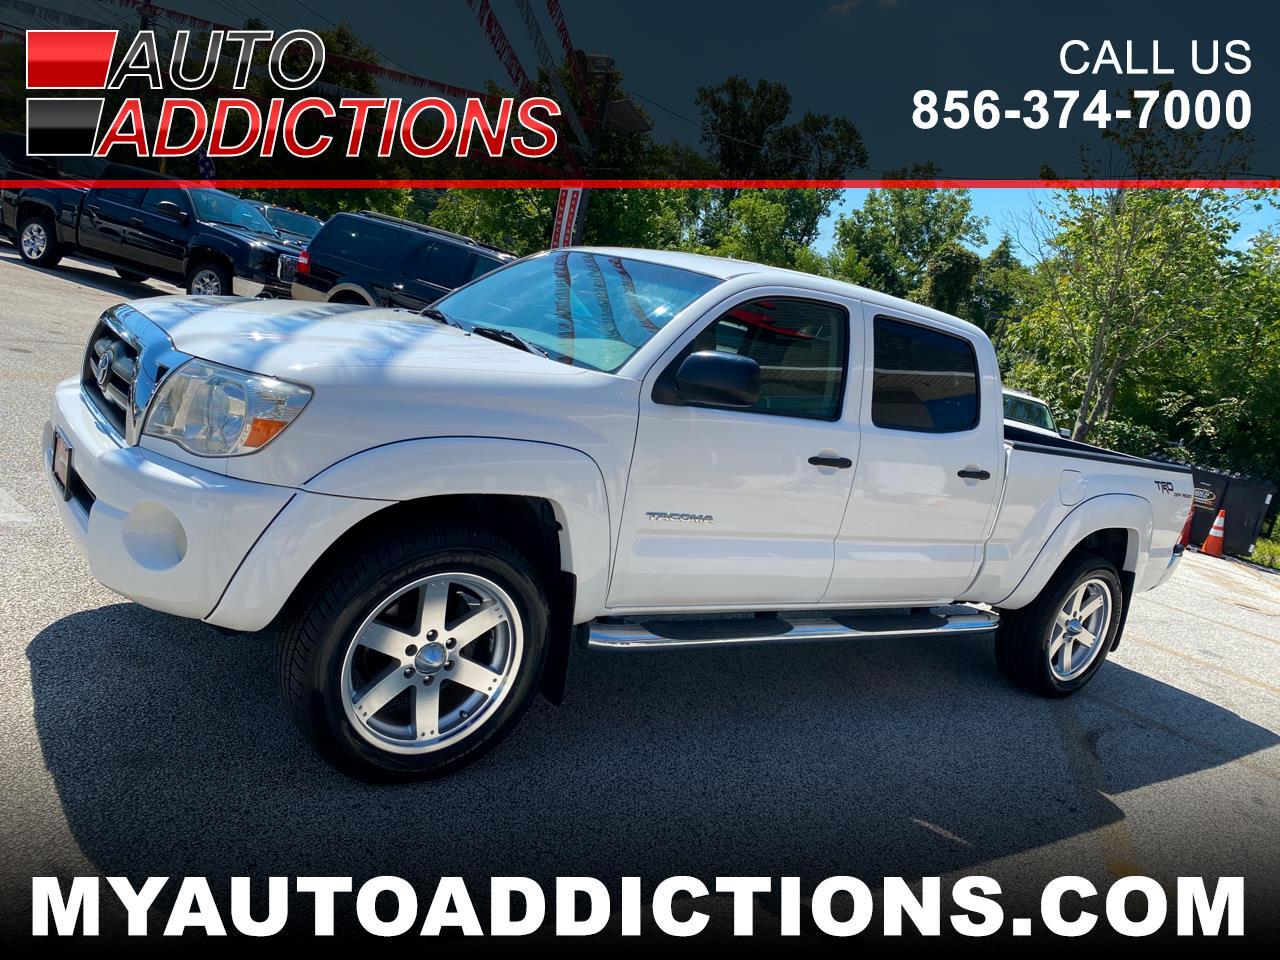 Used 2005 Toyota Tacoma Tacoma Pre-Runner TRD Double Cab for Sale in